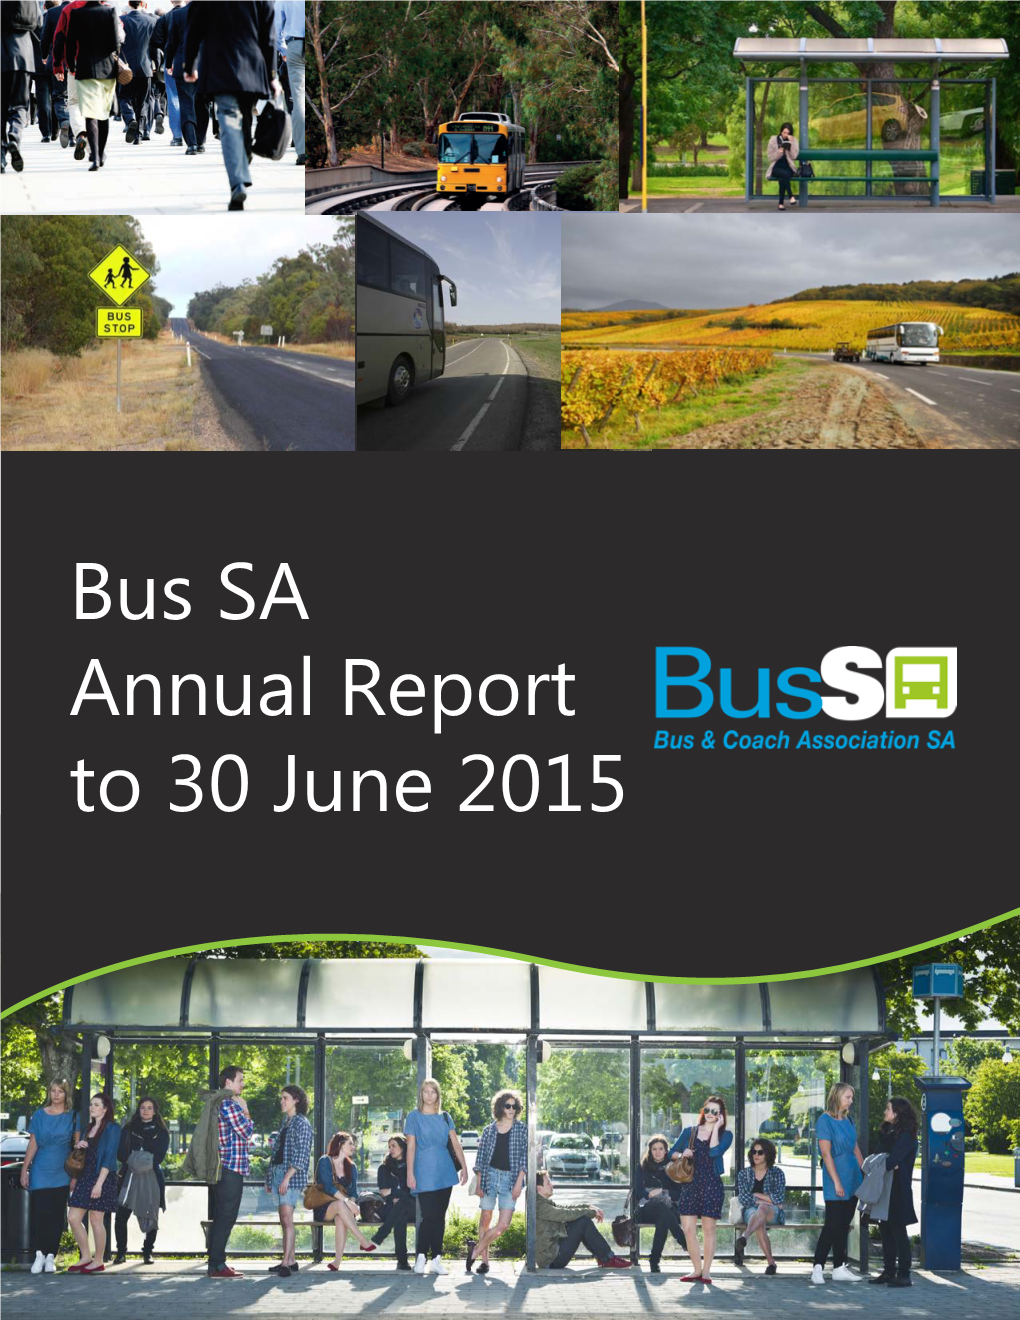 Bus SA Annual Report to 30 June 2015 Welcome to the Bus and Coach Association SA Annual Report 2015